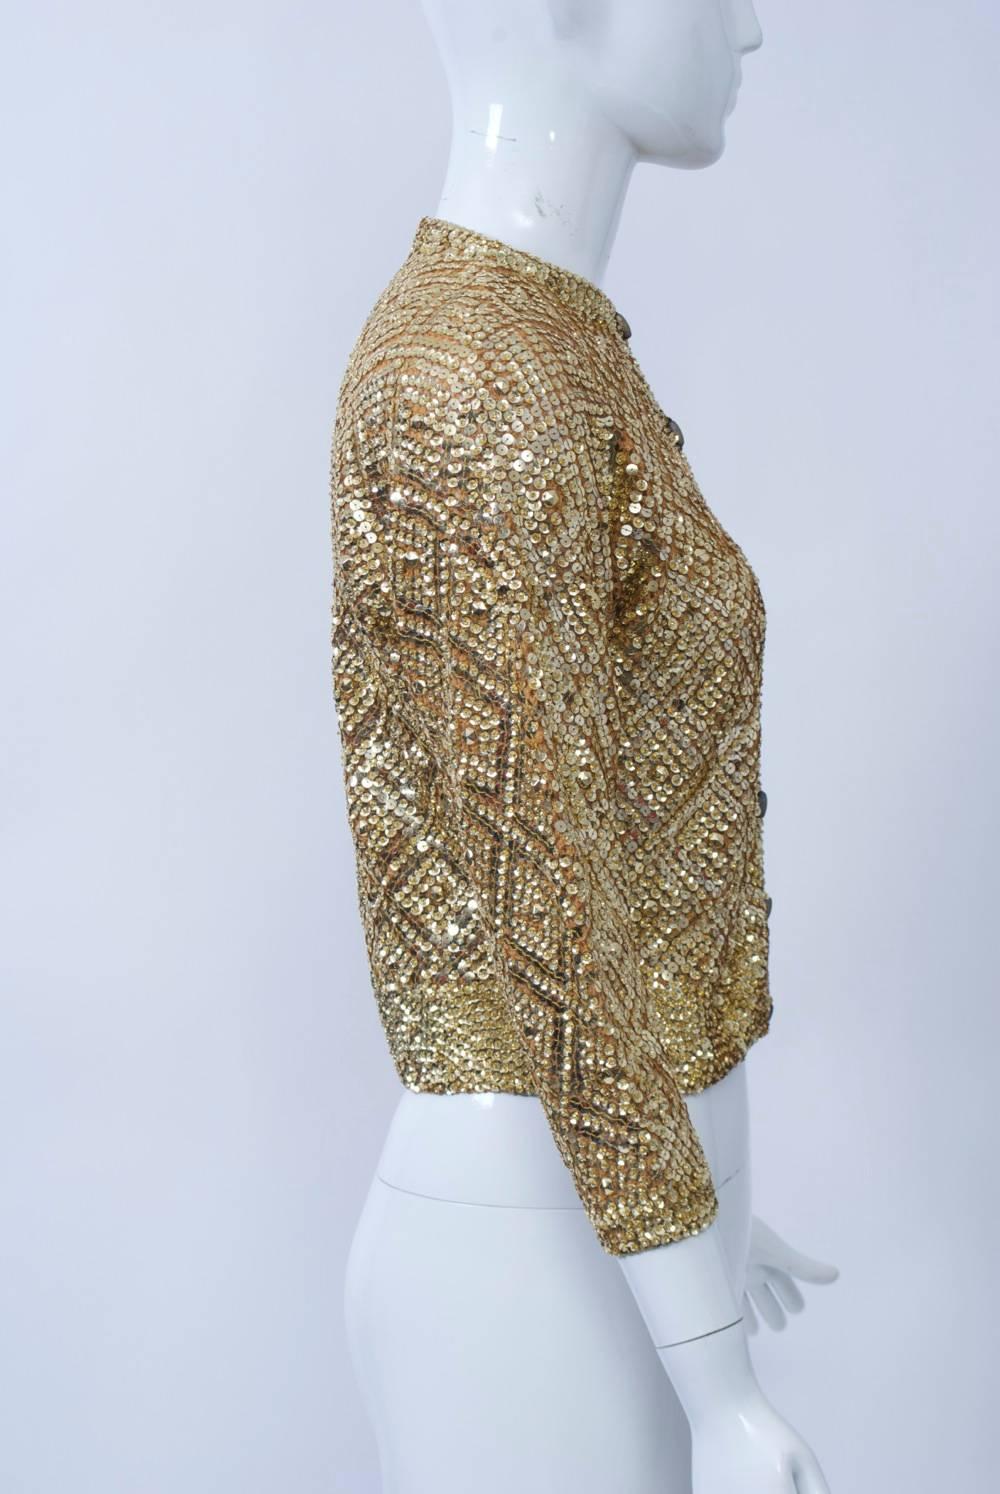 1960s knit cardigan covered allover with gold sequins set in a diamond pattern and finished with matte gold log-shaped buttons. Three-quarter sleeves. Made by high-end Italian knitwear designer Laura Aponte. Approximate size S.